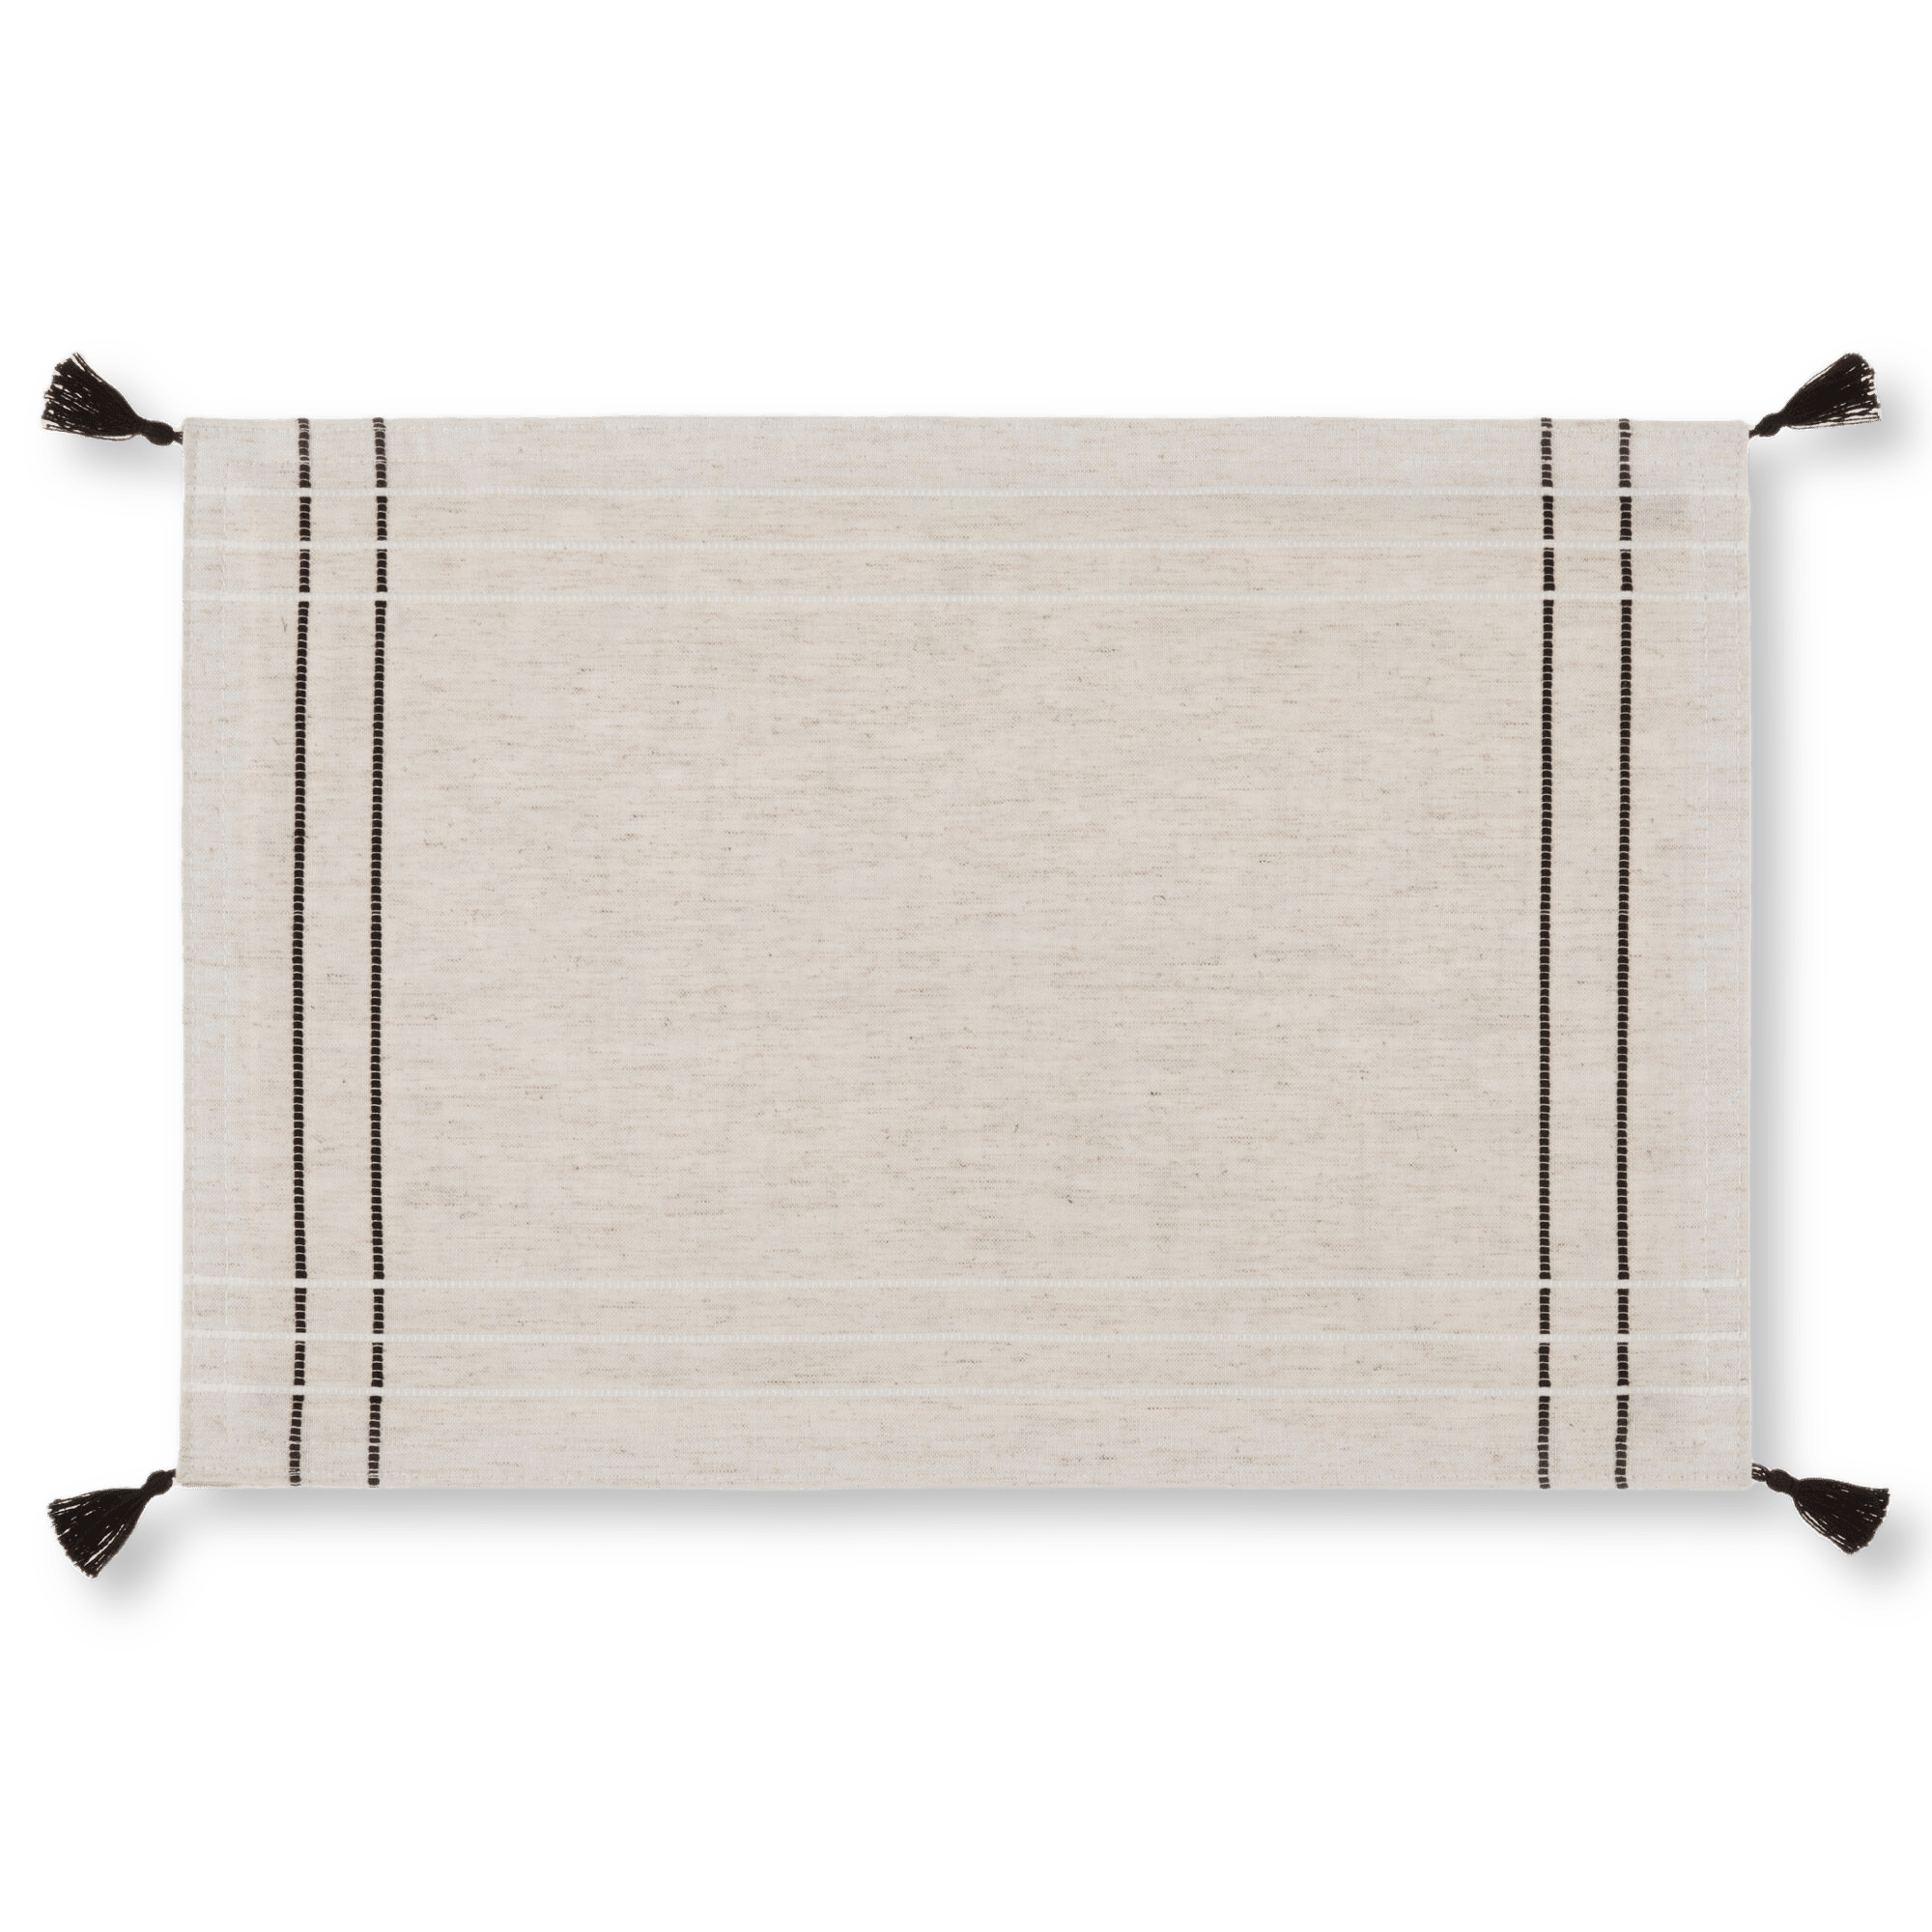 Set of 4 Fabric Placemats with Tassels